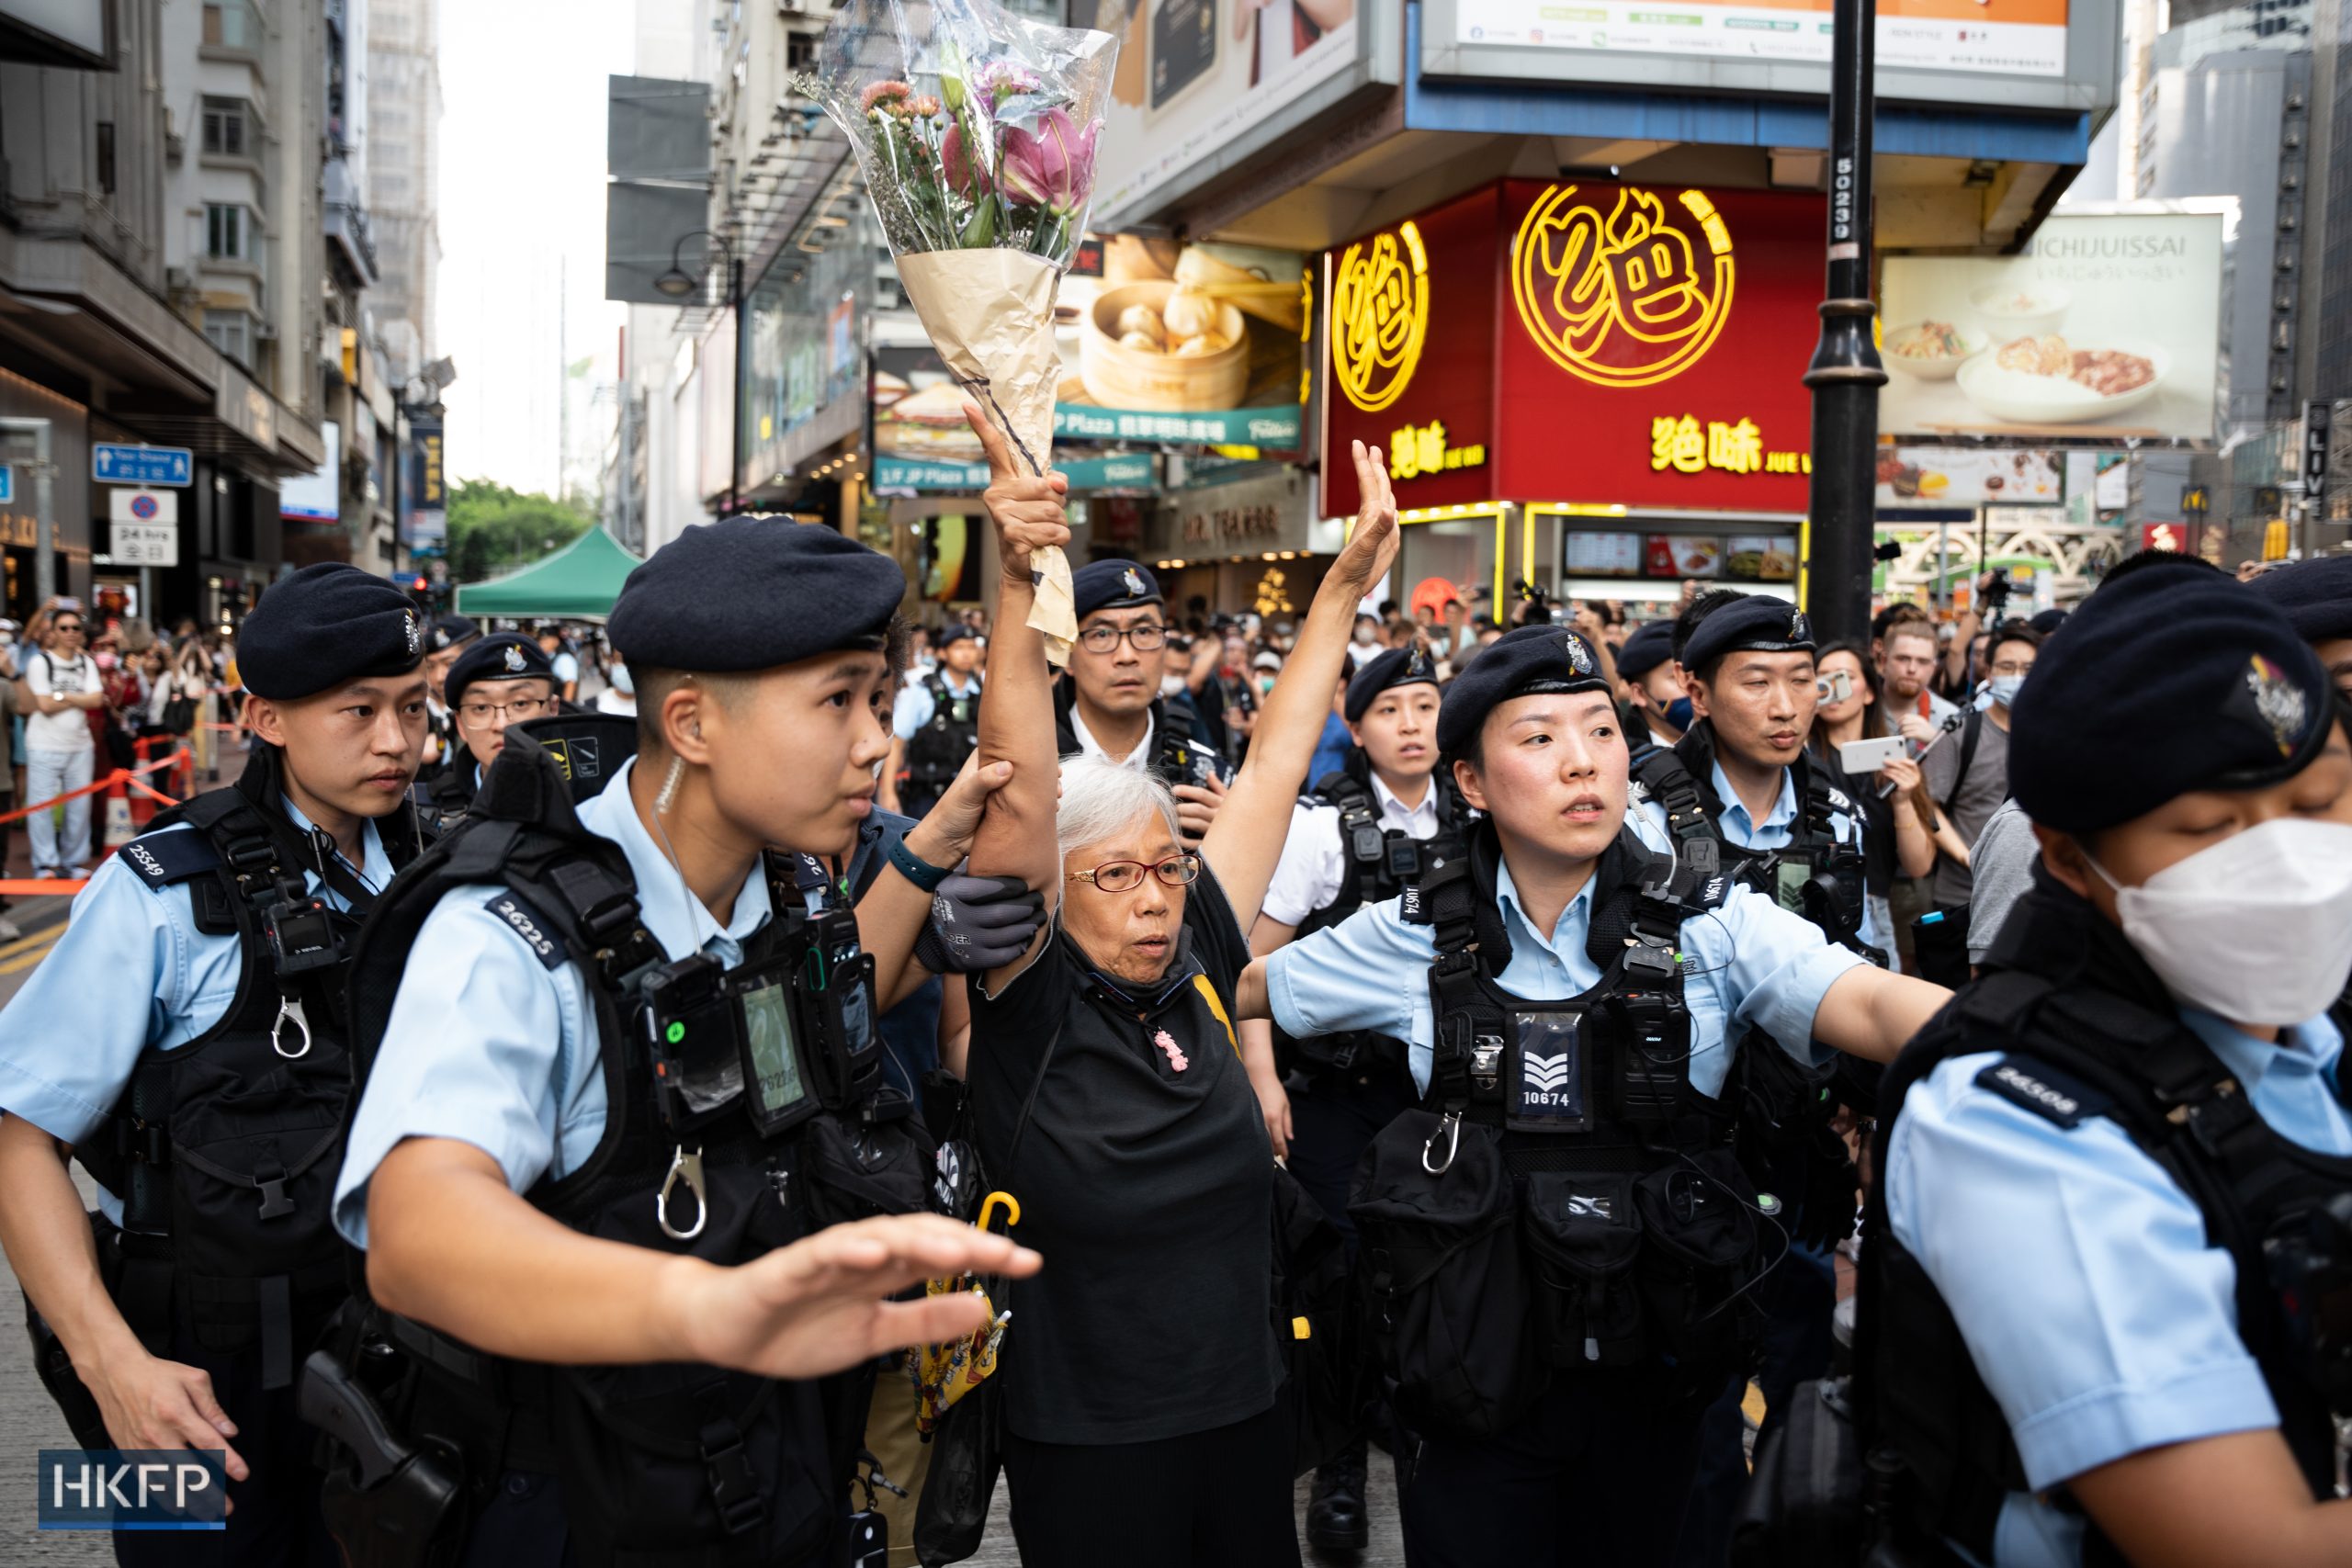 Veteran activist Grandma Wong is taken away by police in Causeway Bay on June 4, 2023, the 34th anniversary of the Tiananmen crackdown. Photo: Kyle Lam/HKFP.